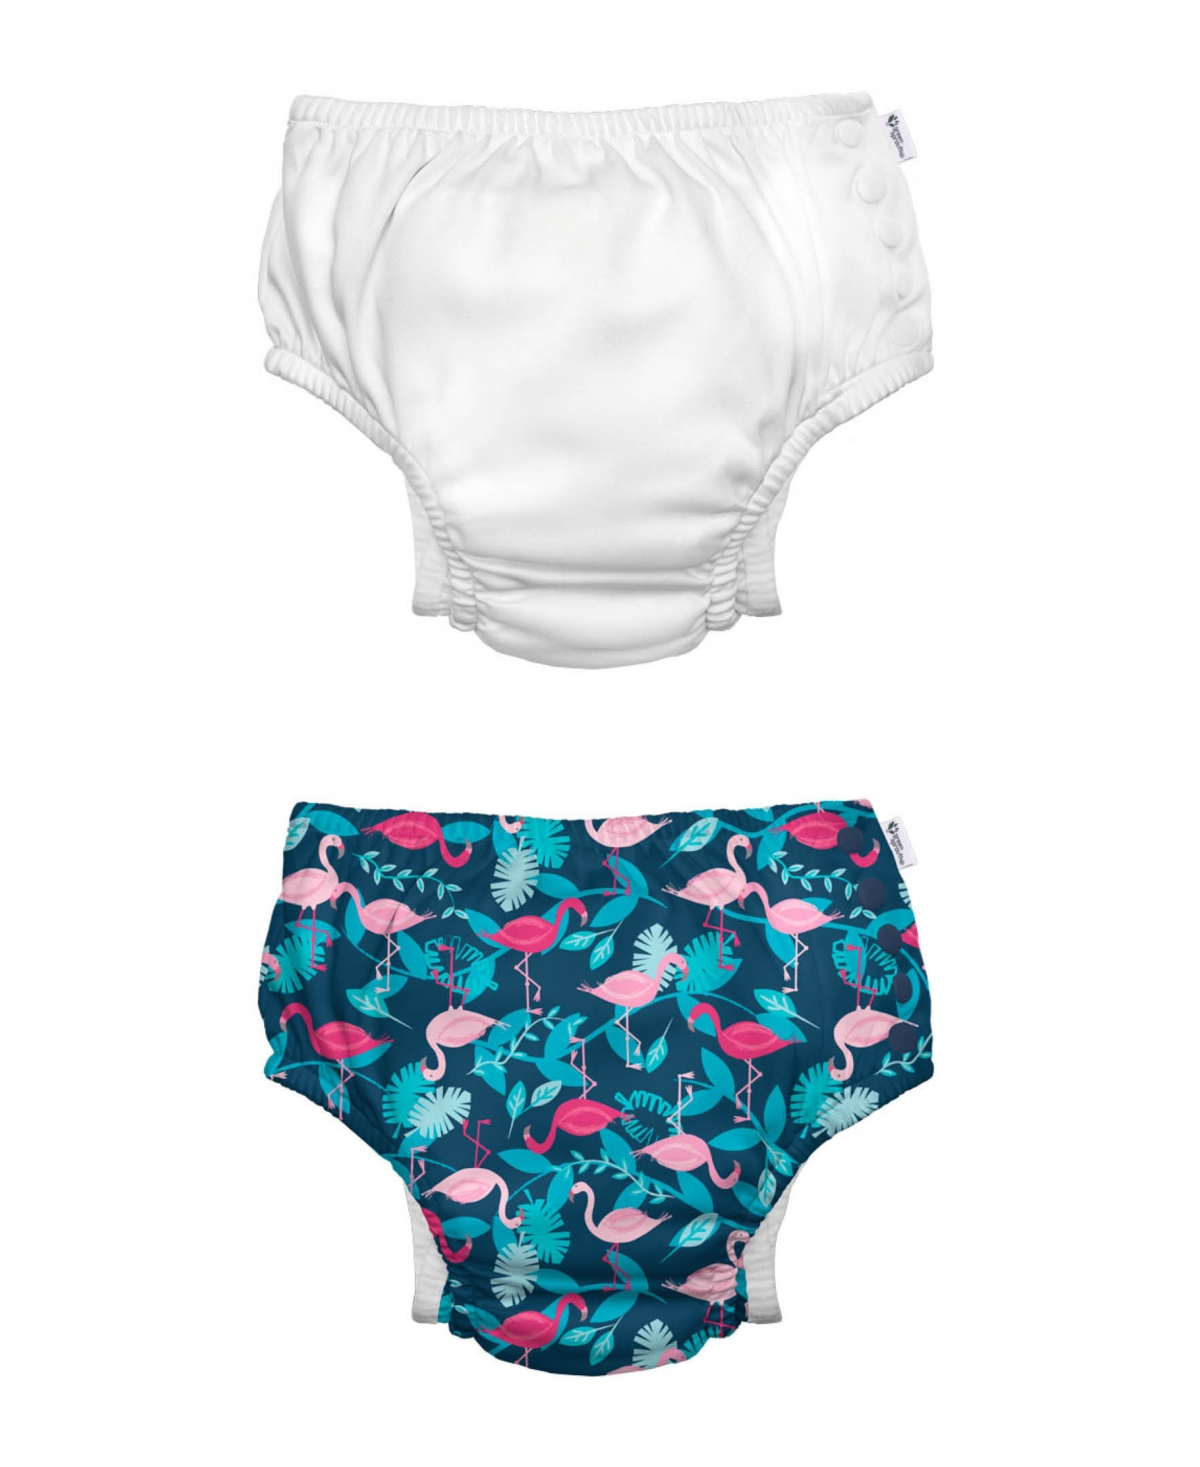 Green Sprouts Toddler Boys Or Toddler Girls Snap Swim Diaper, Pack Of 2 In Navy Flamingos